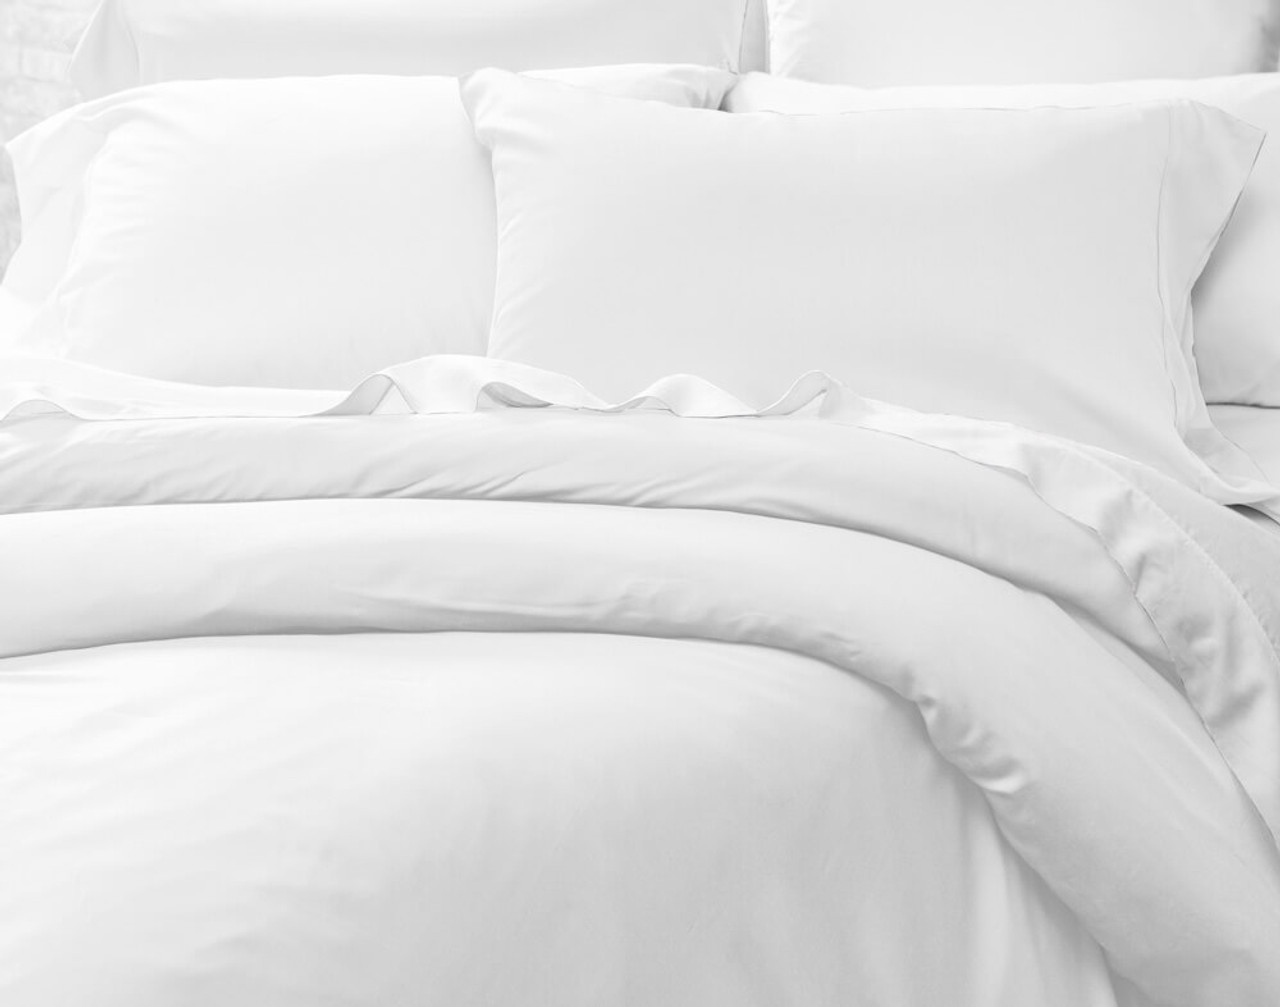 Full set of Cotton Blend Percale Sheets under a Cotton Blend Percale Duvet Cover.